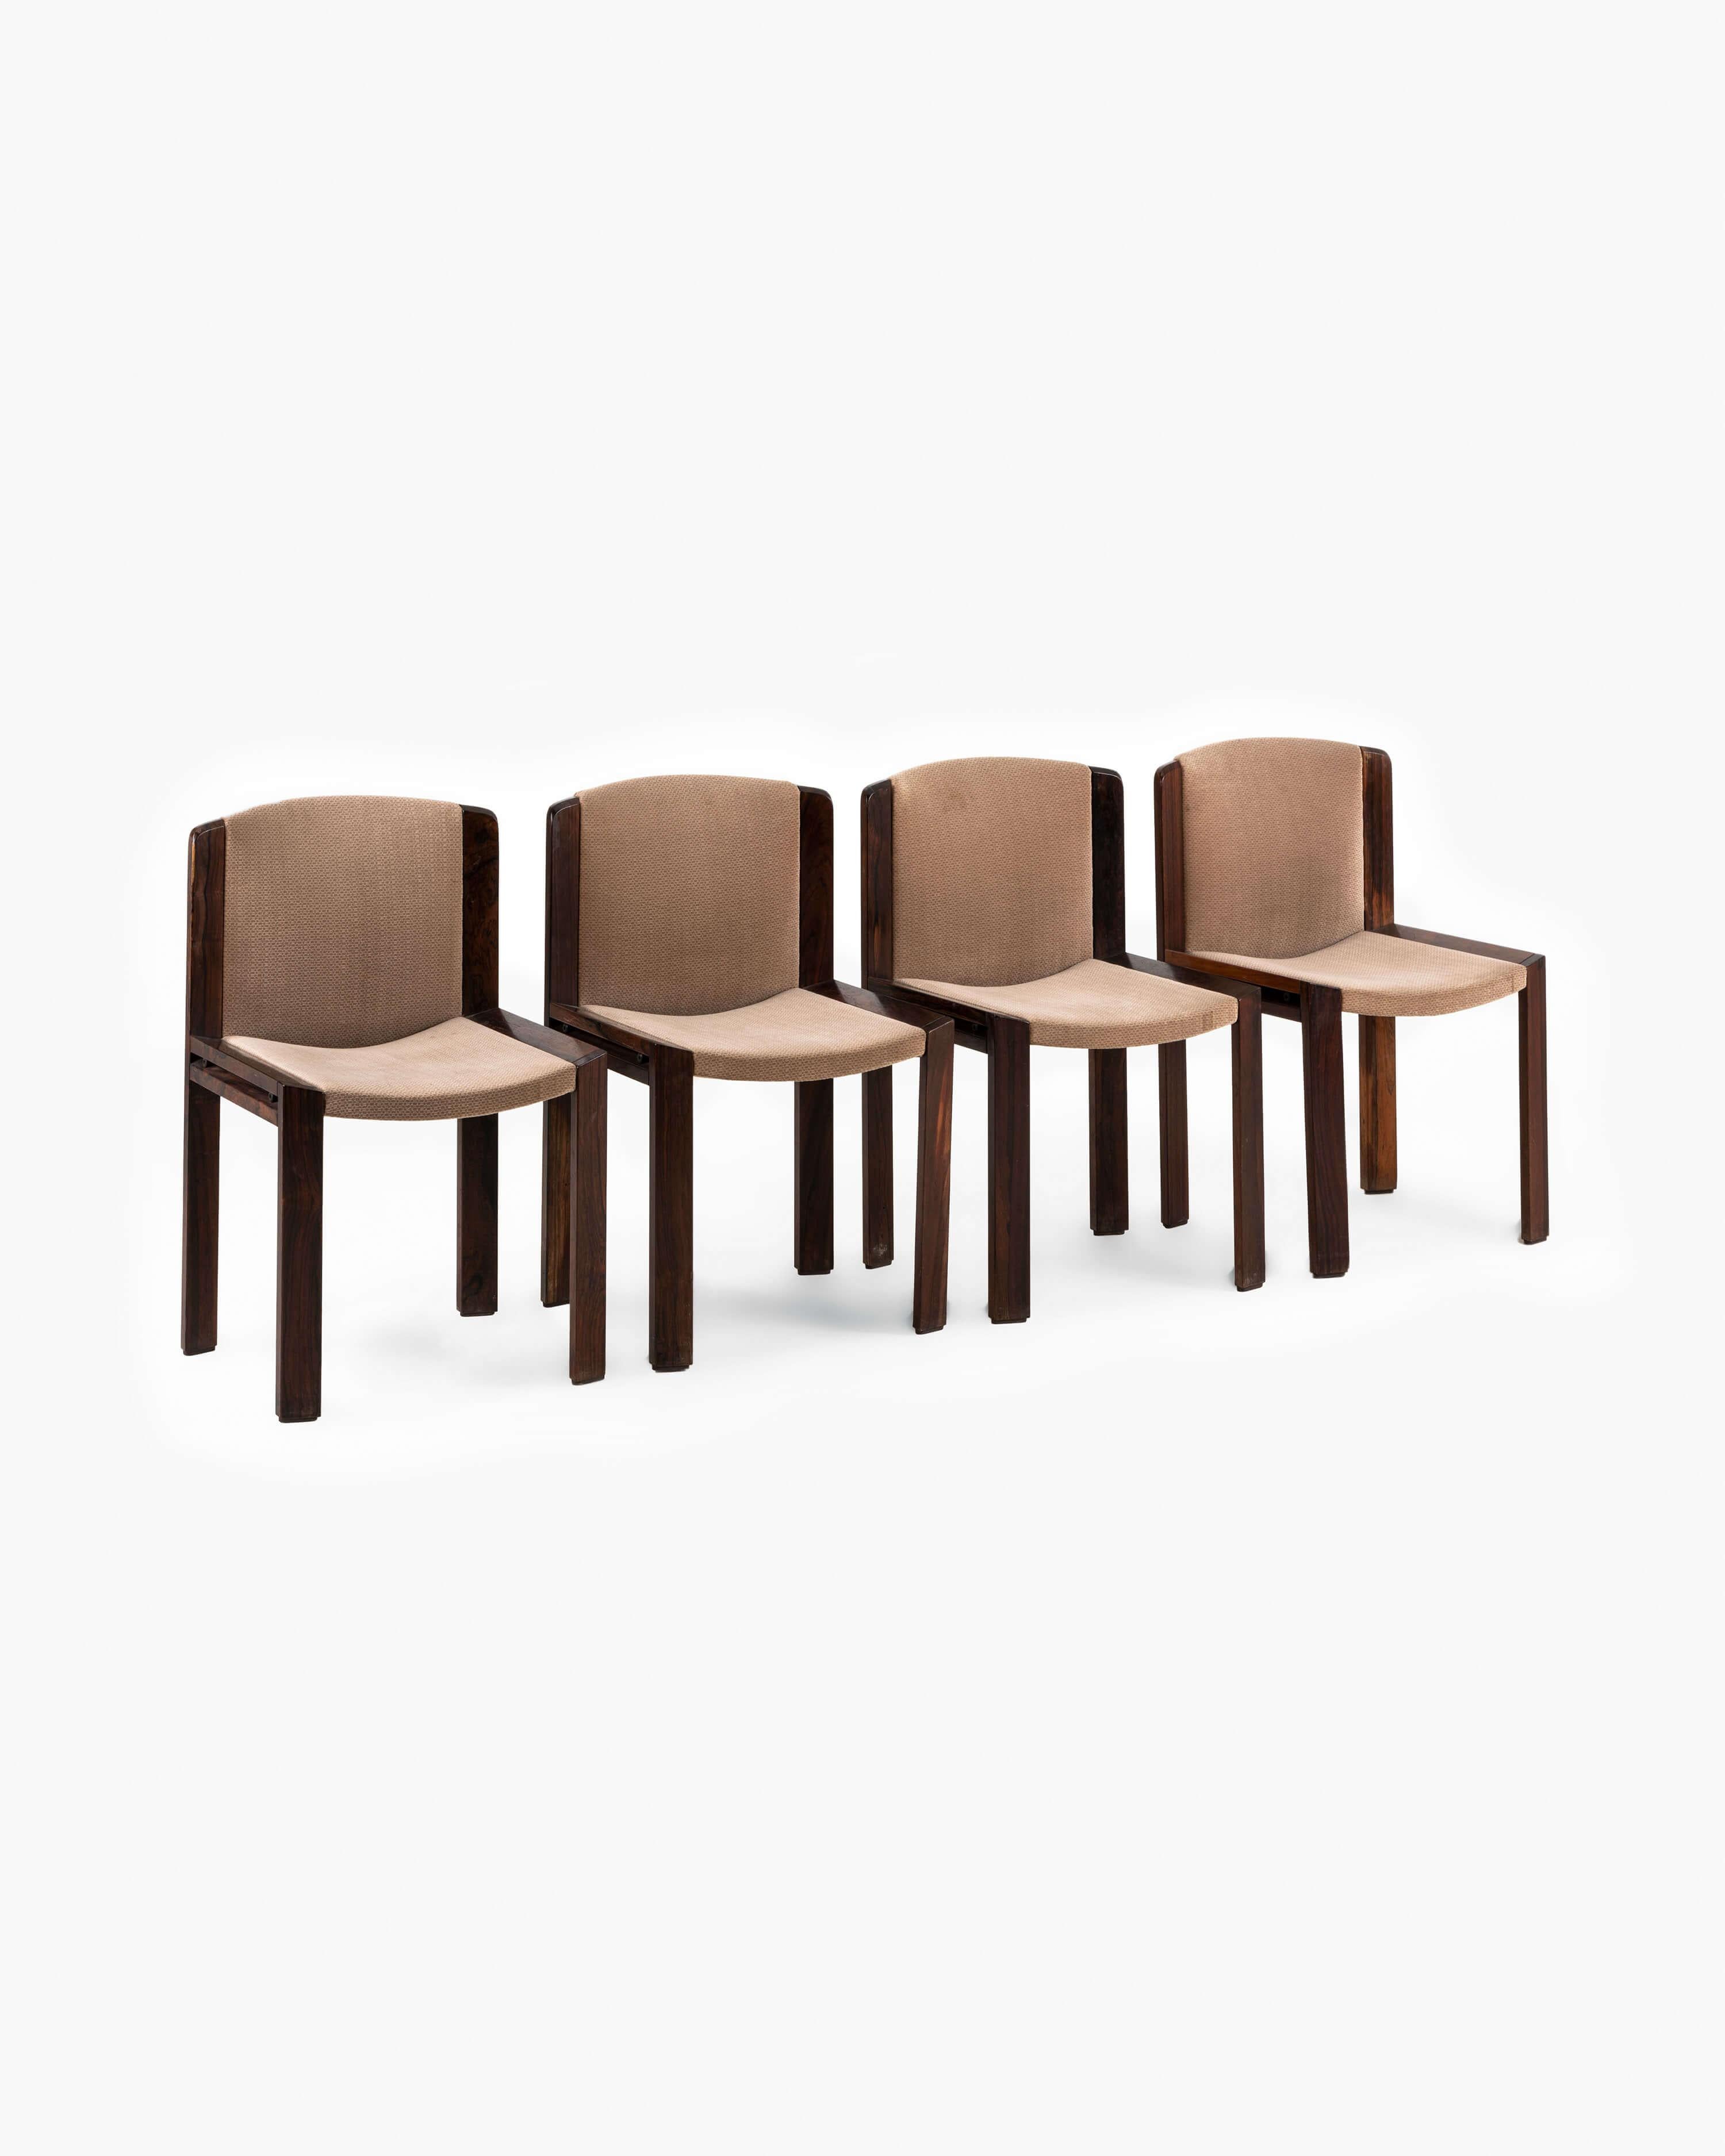 Immerse yourself in the captivating allure of mid-century modern design with this exceptional set of four Original Model 300 Chairs, masterfully crafted by Joe Colombo in 1965. Renowned for their timeless appeal, these chairs effortlessly blend